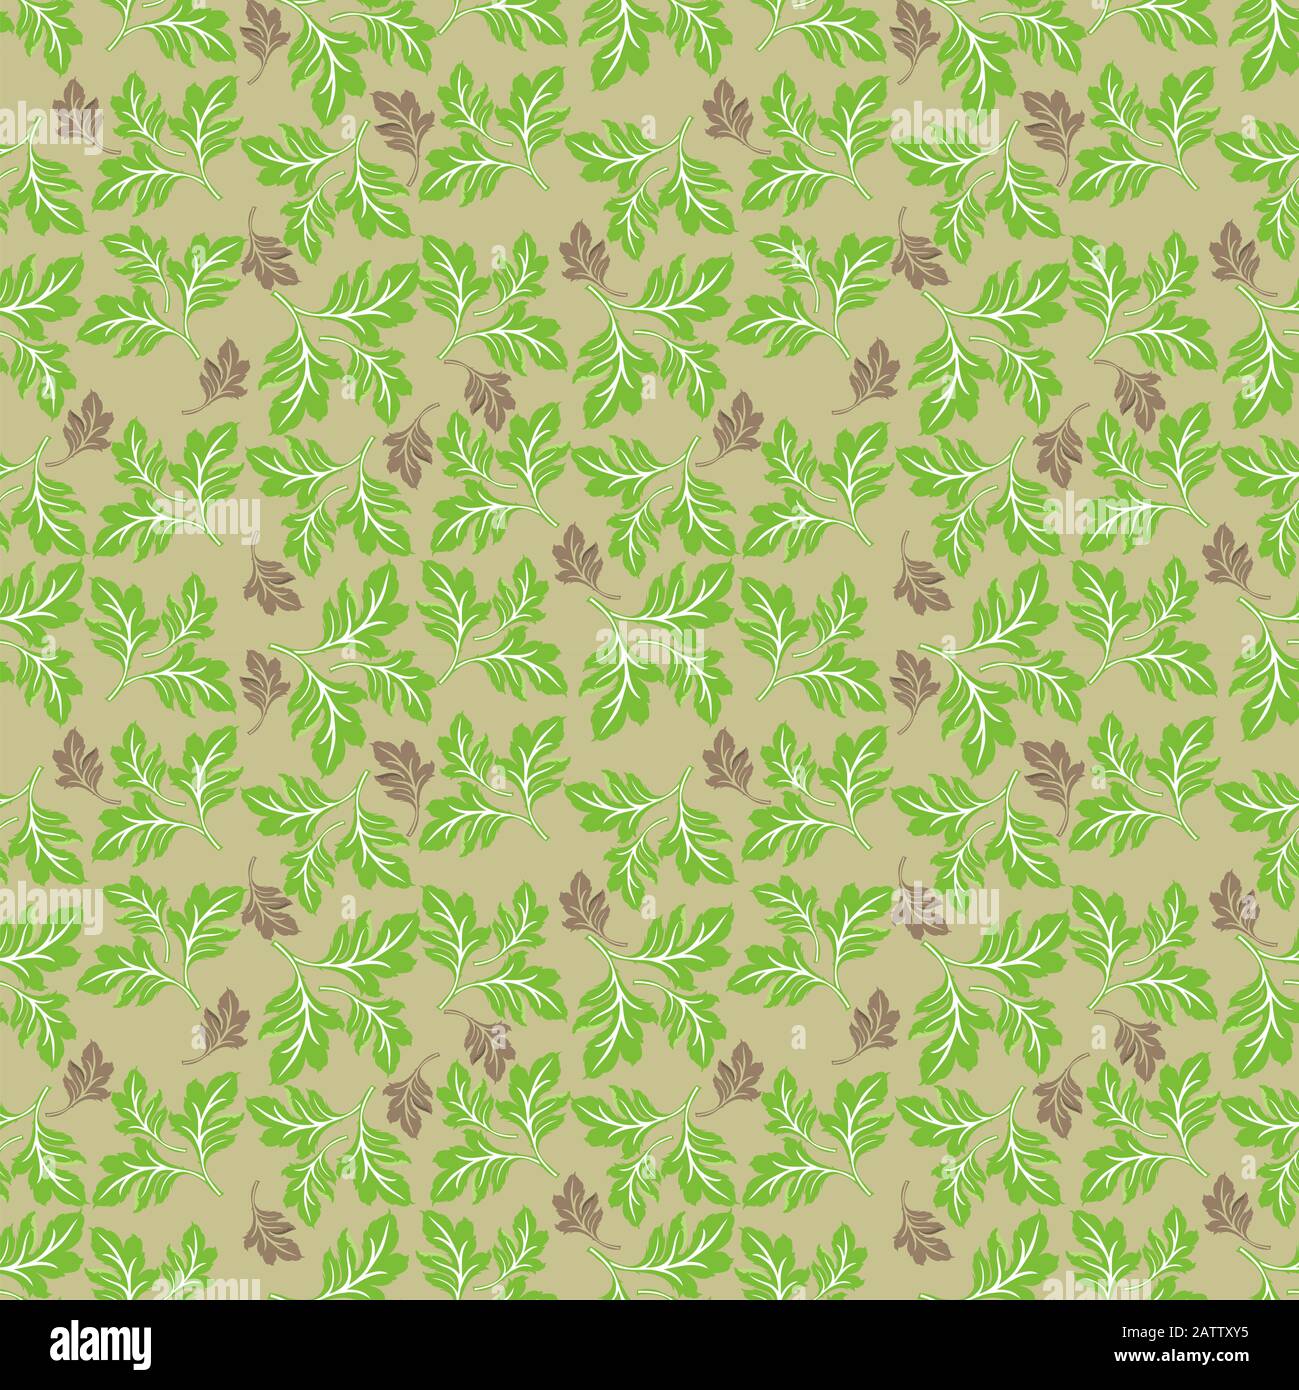 Seamless pattern or background of leaf and two colour pattern Stock Photo